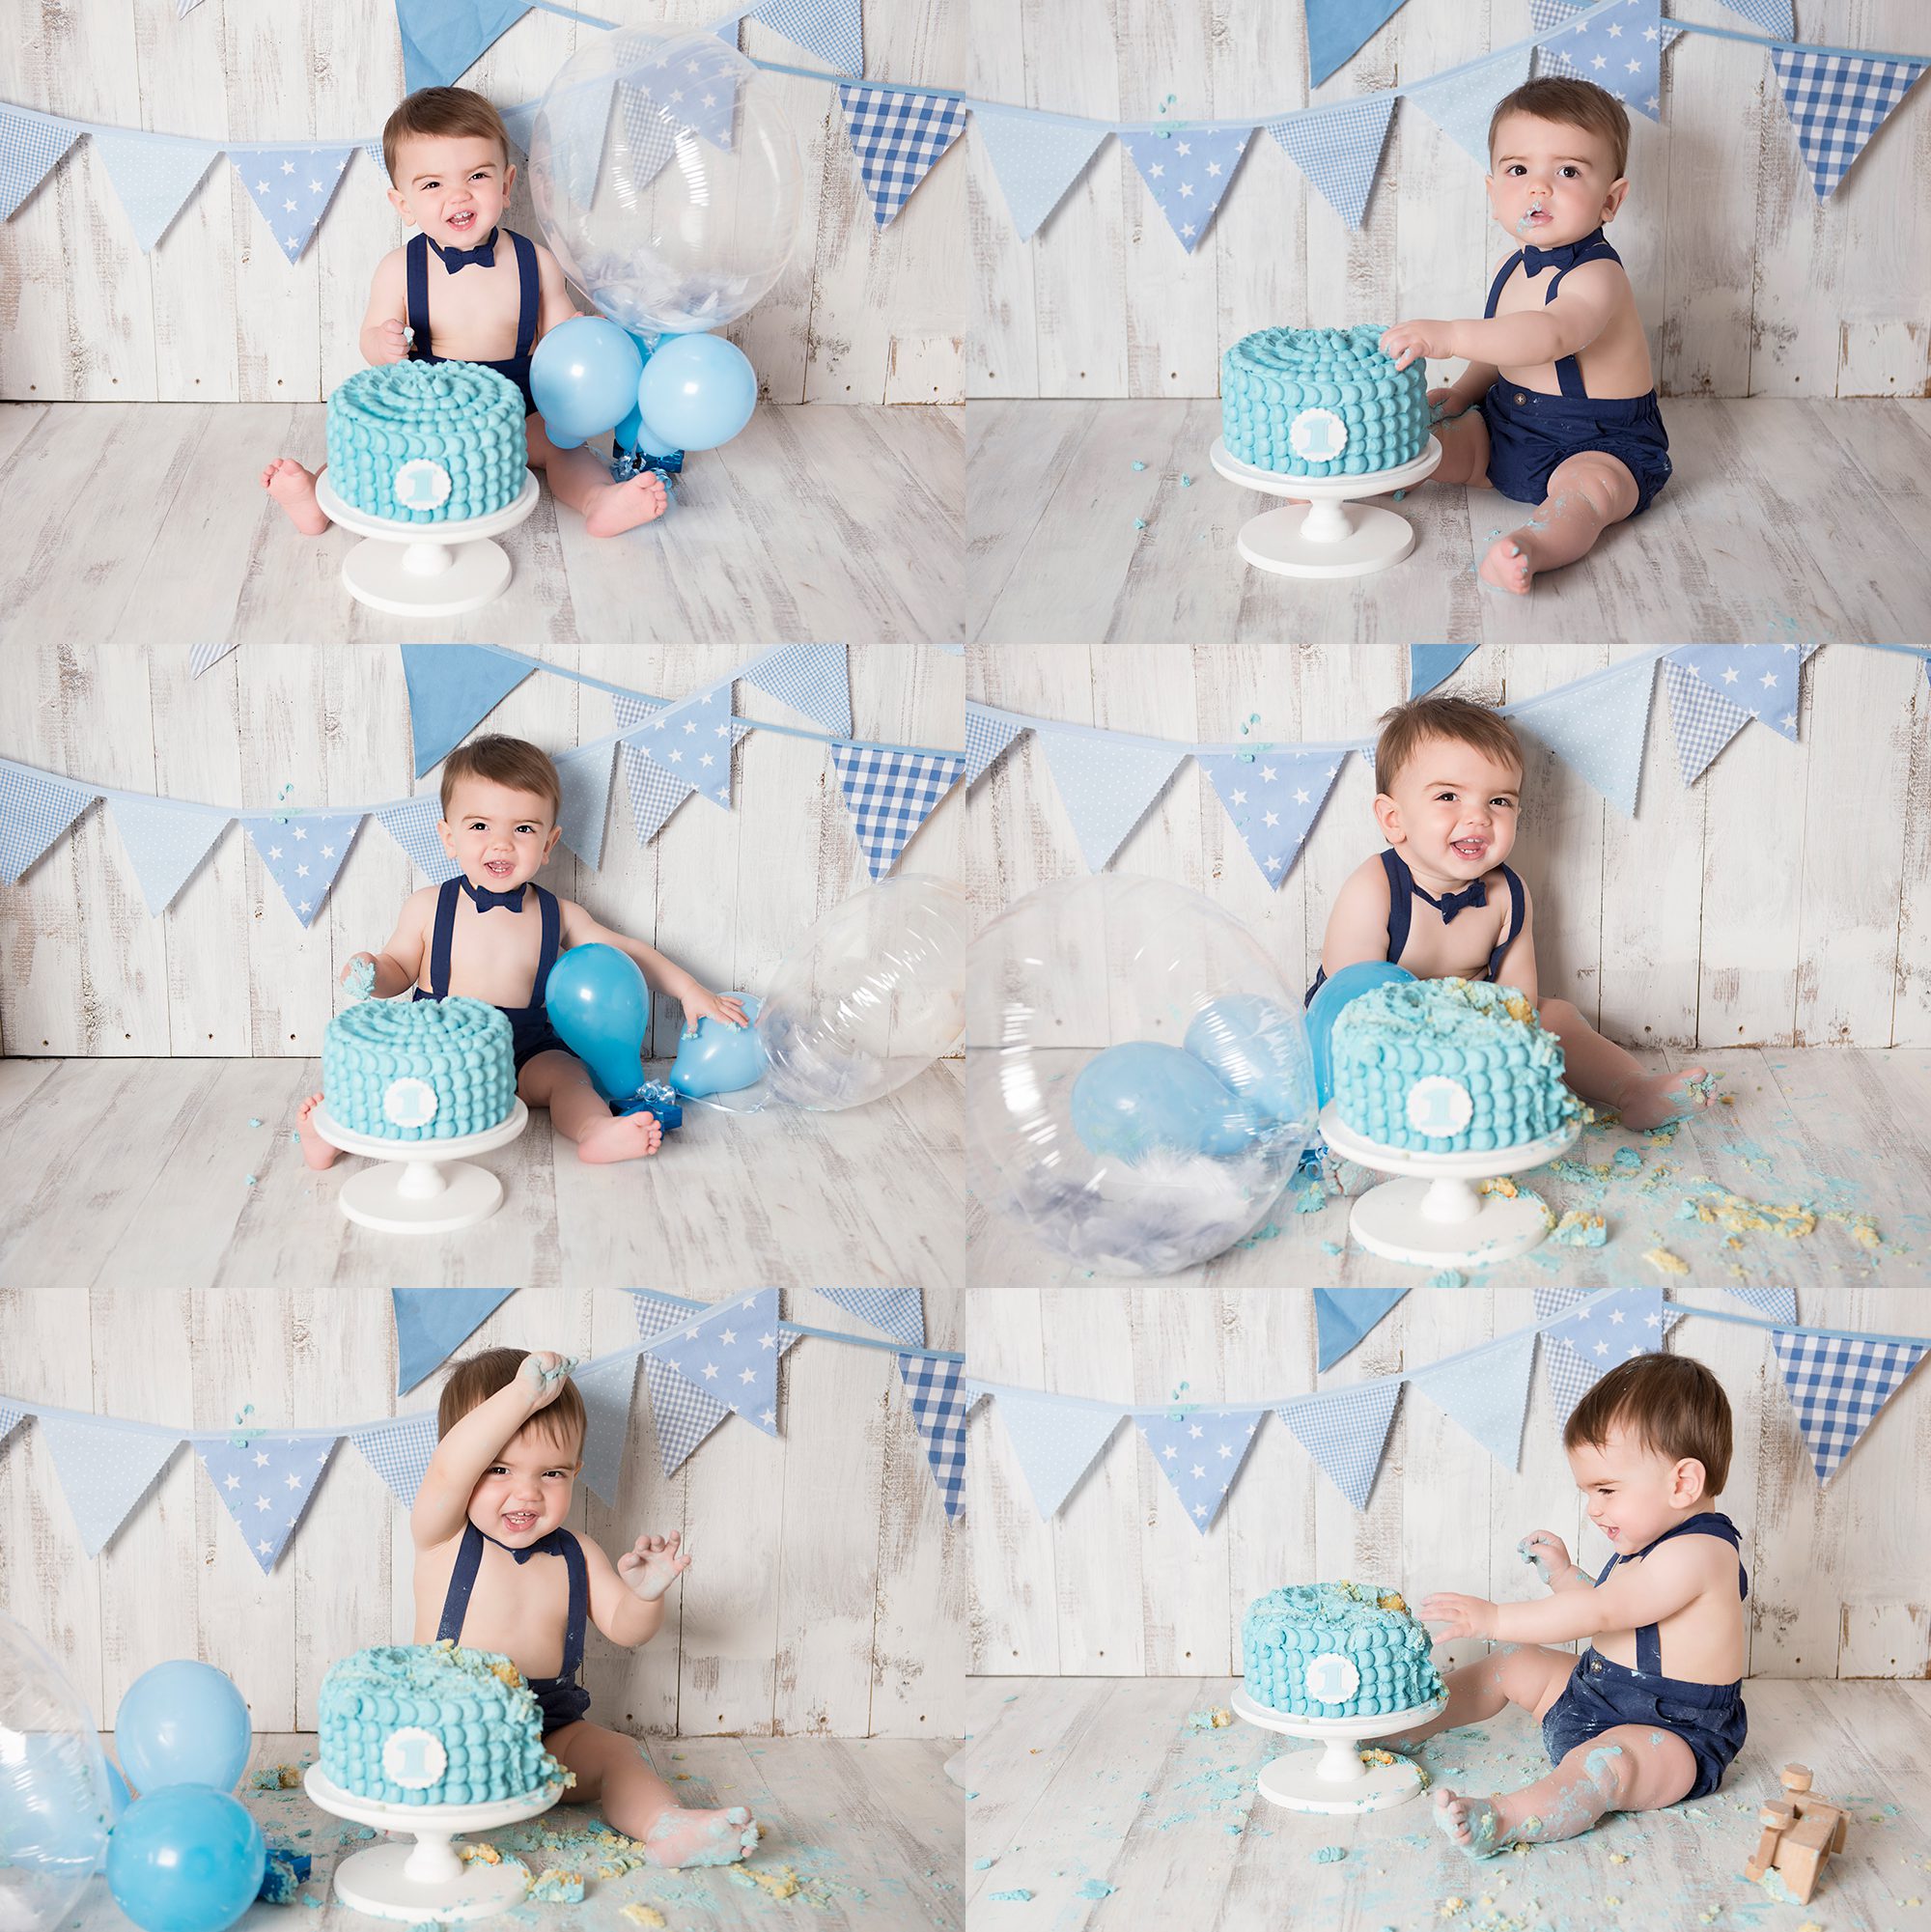 fun photos of cake smash photoshoot with blue cake and balloons by photographer in Berkshire